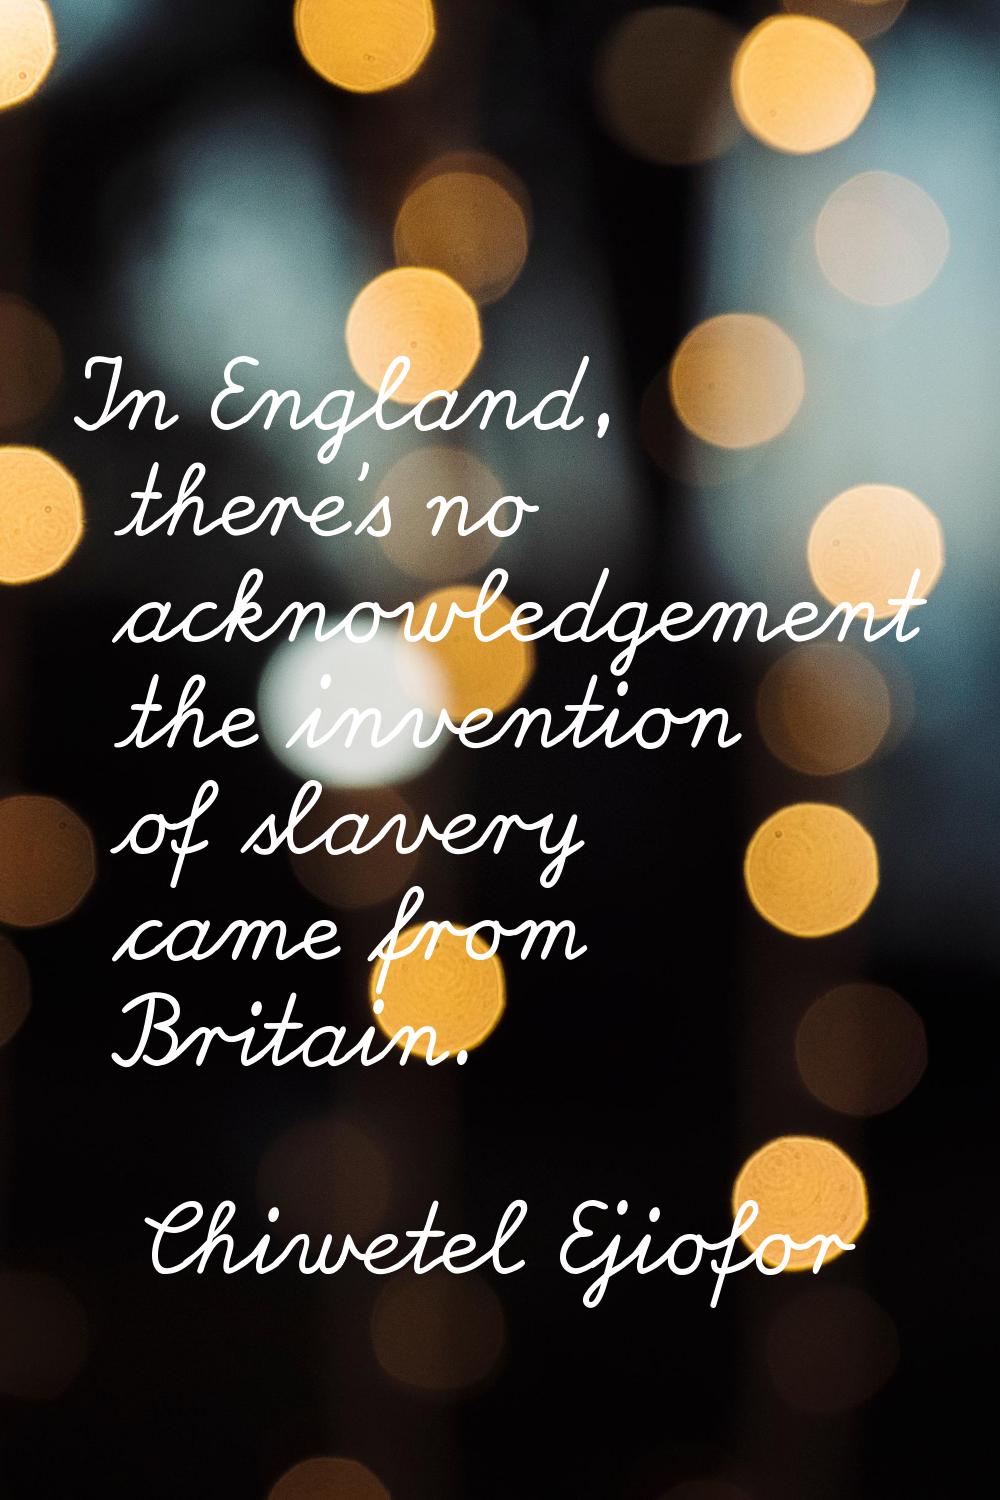 In England, there's no acknowledgement the invention of slavery came from Britain.